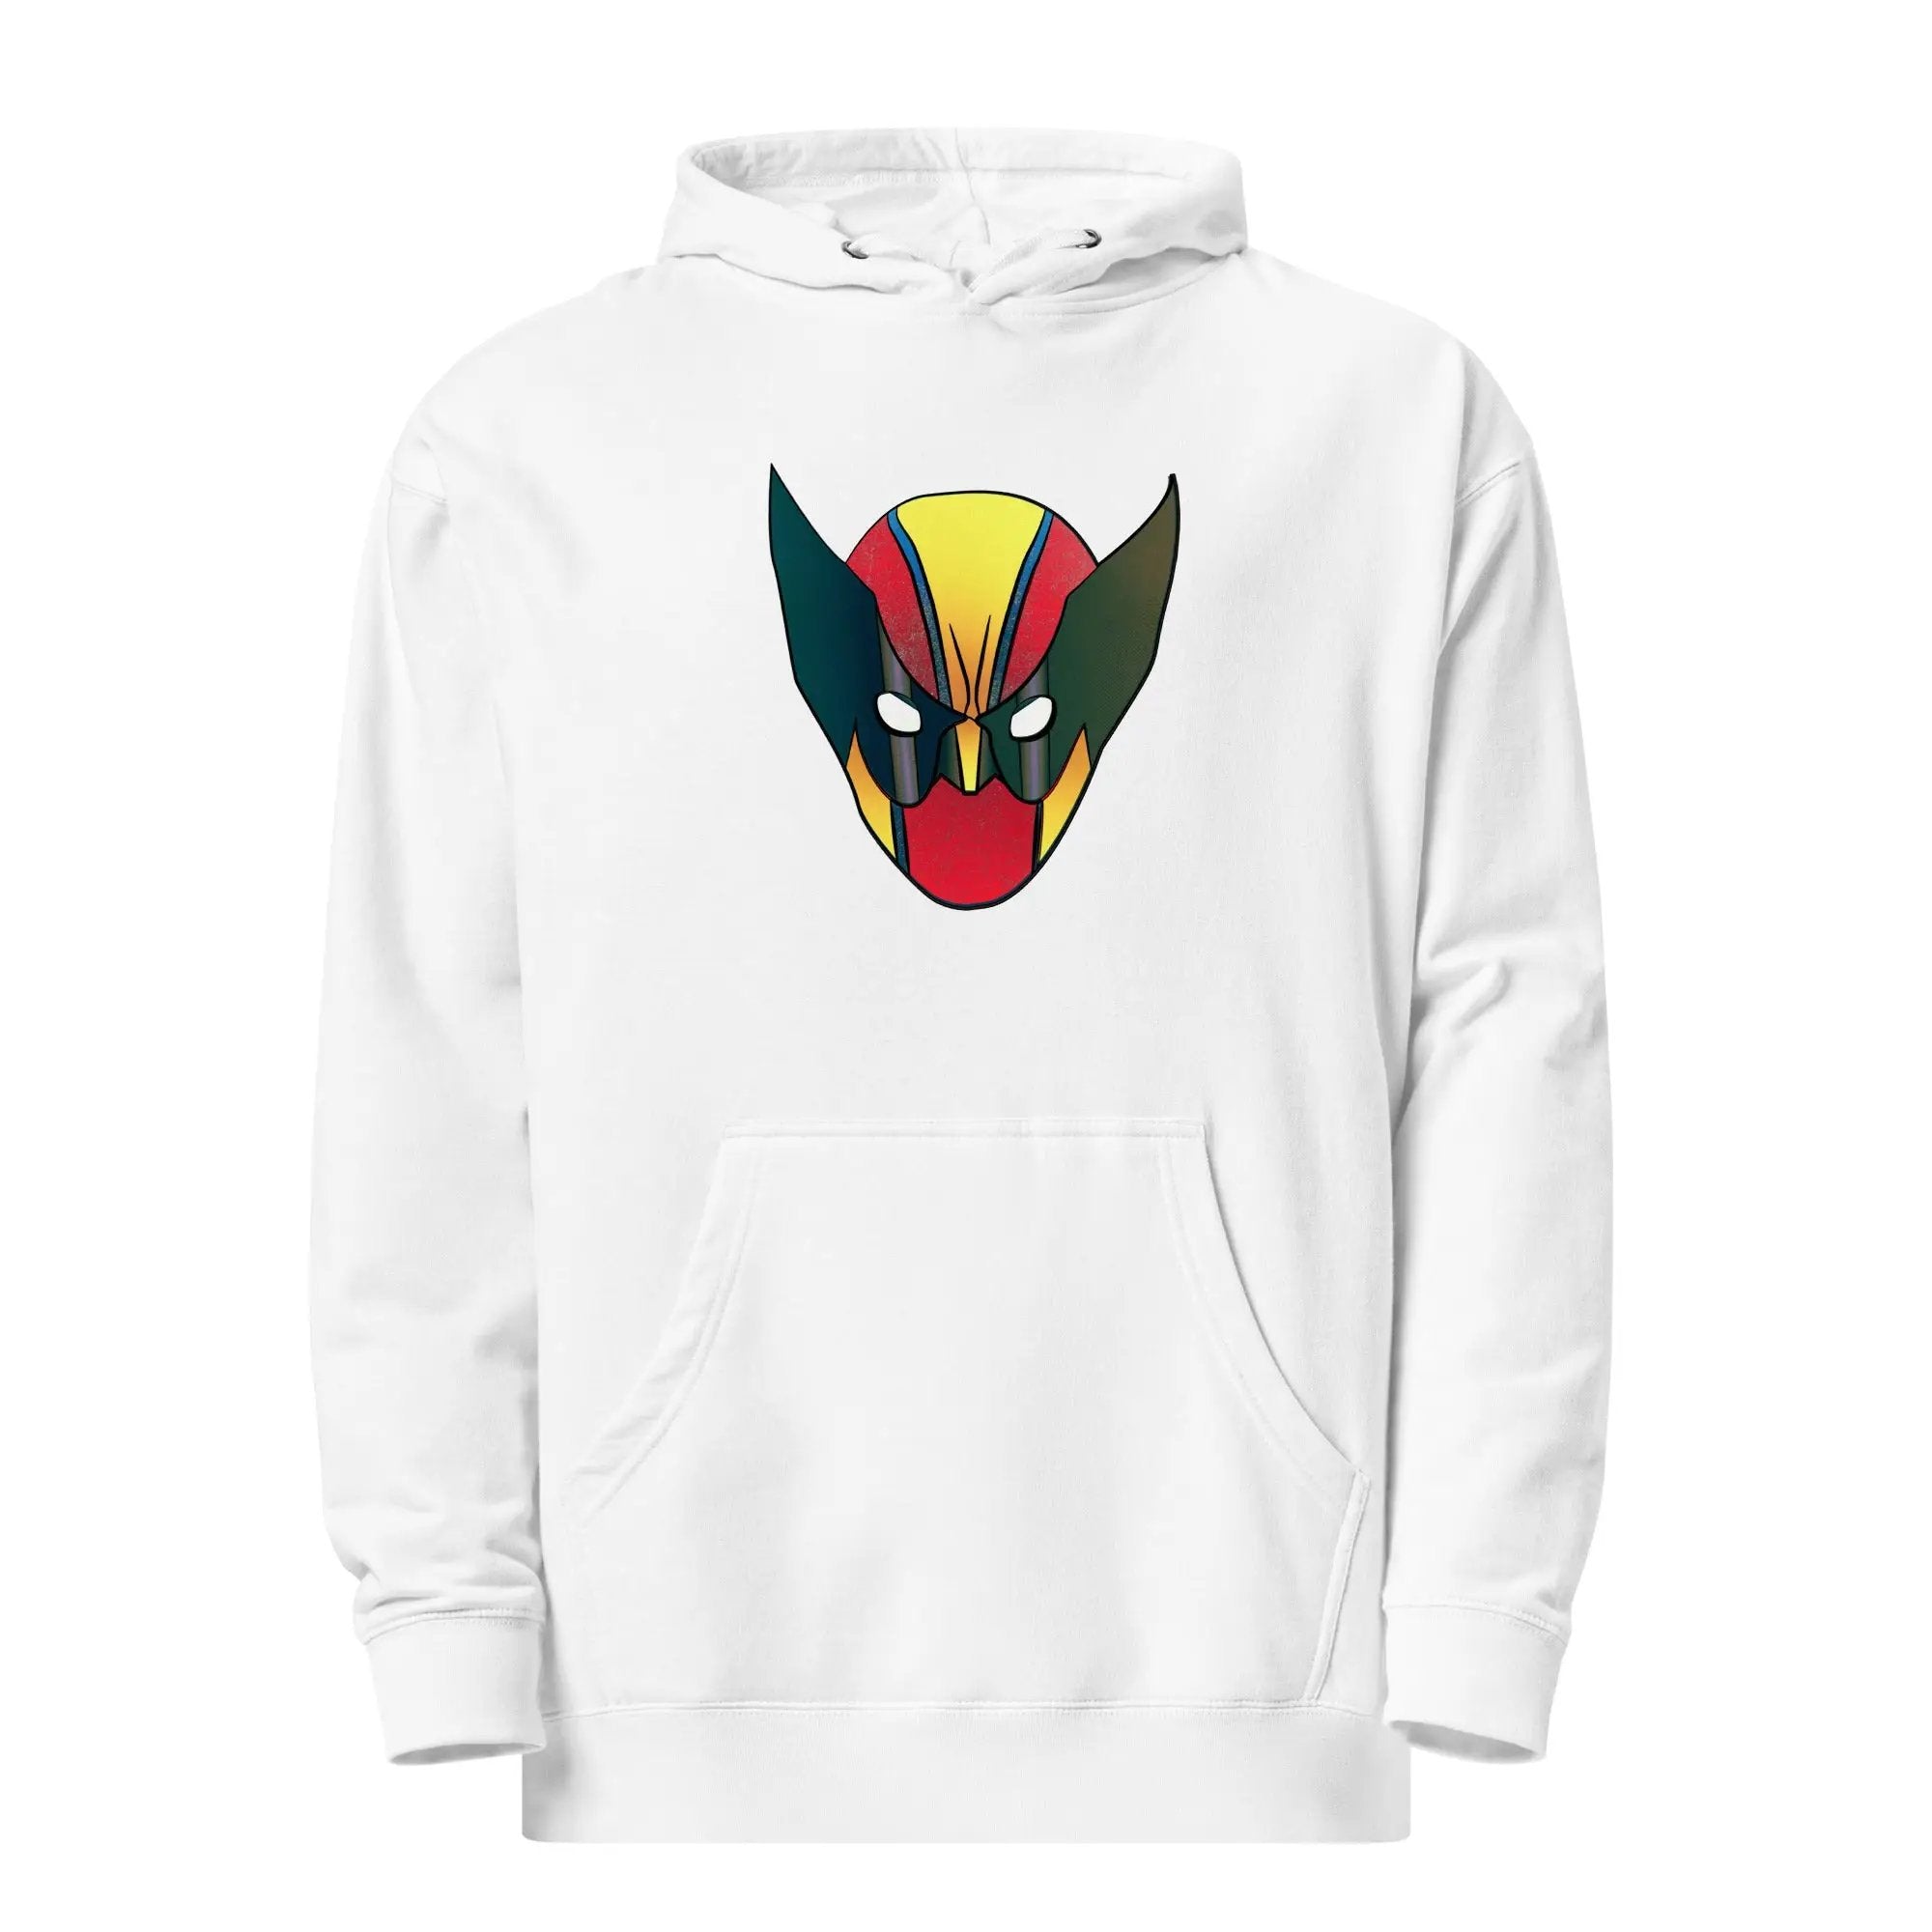 a white hoodie with a red, yellow, and green mask on it